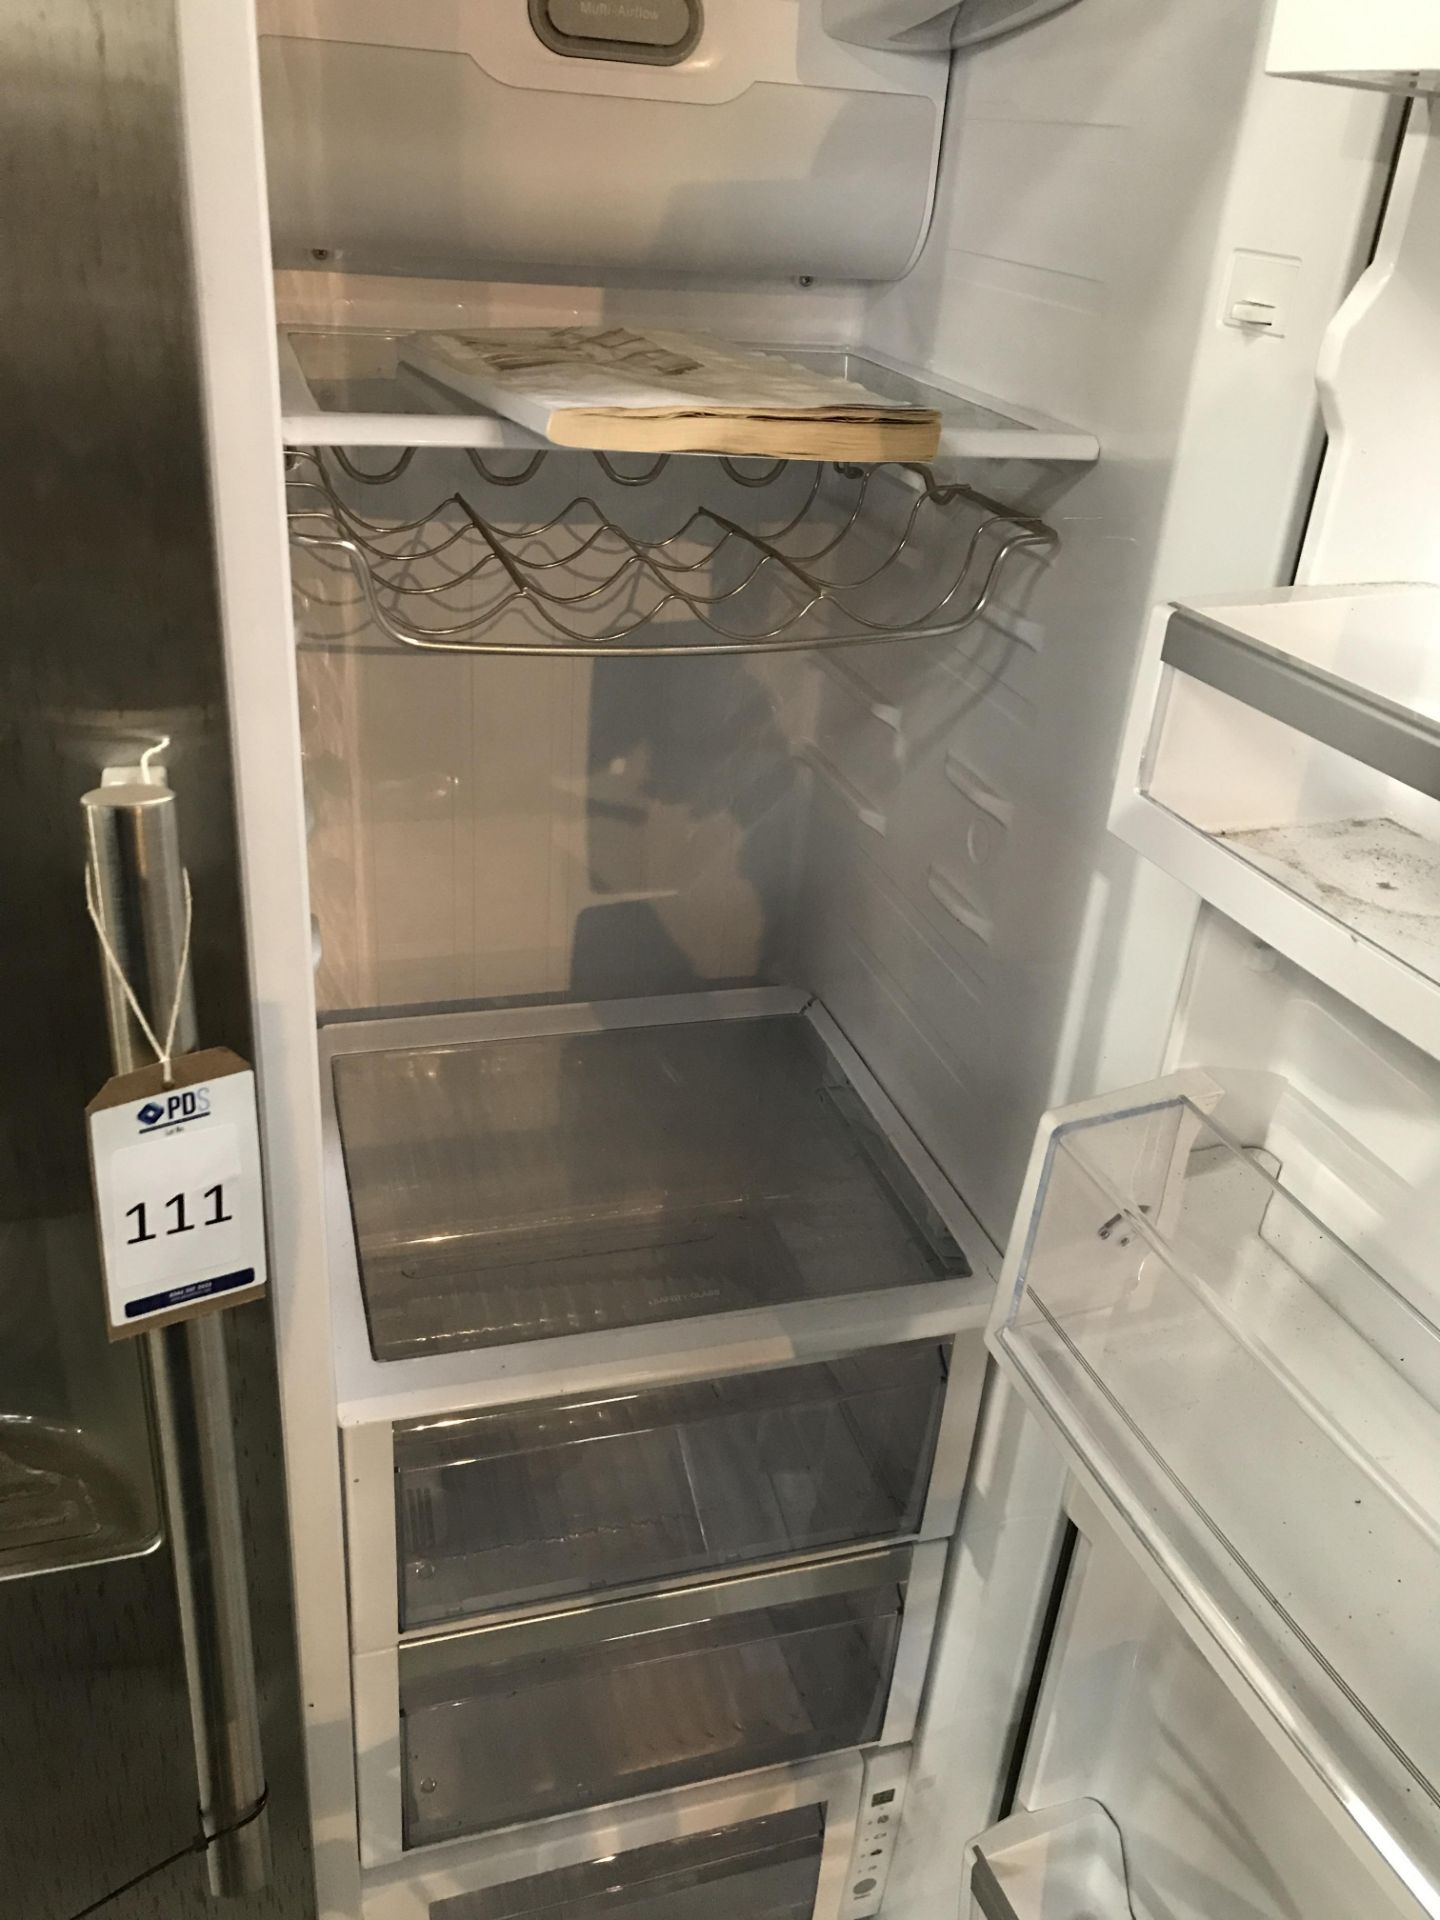 NEF FD9407 American Style Refrigerator/Freezer (Location: Brentwood. Please Refer to General Notes) - Image 3 of 3